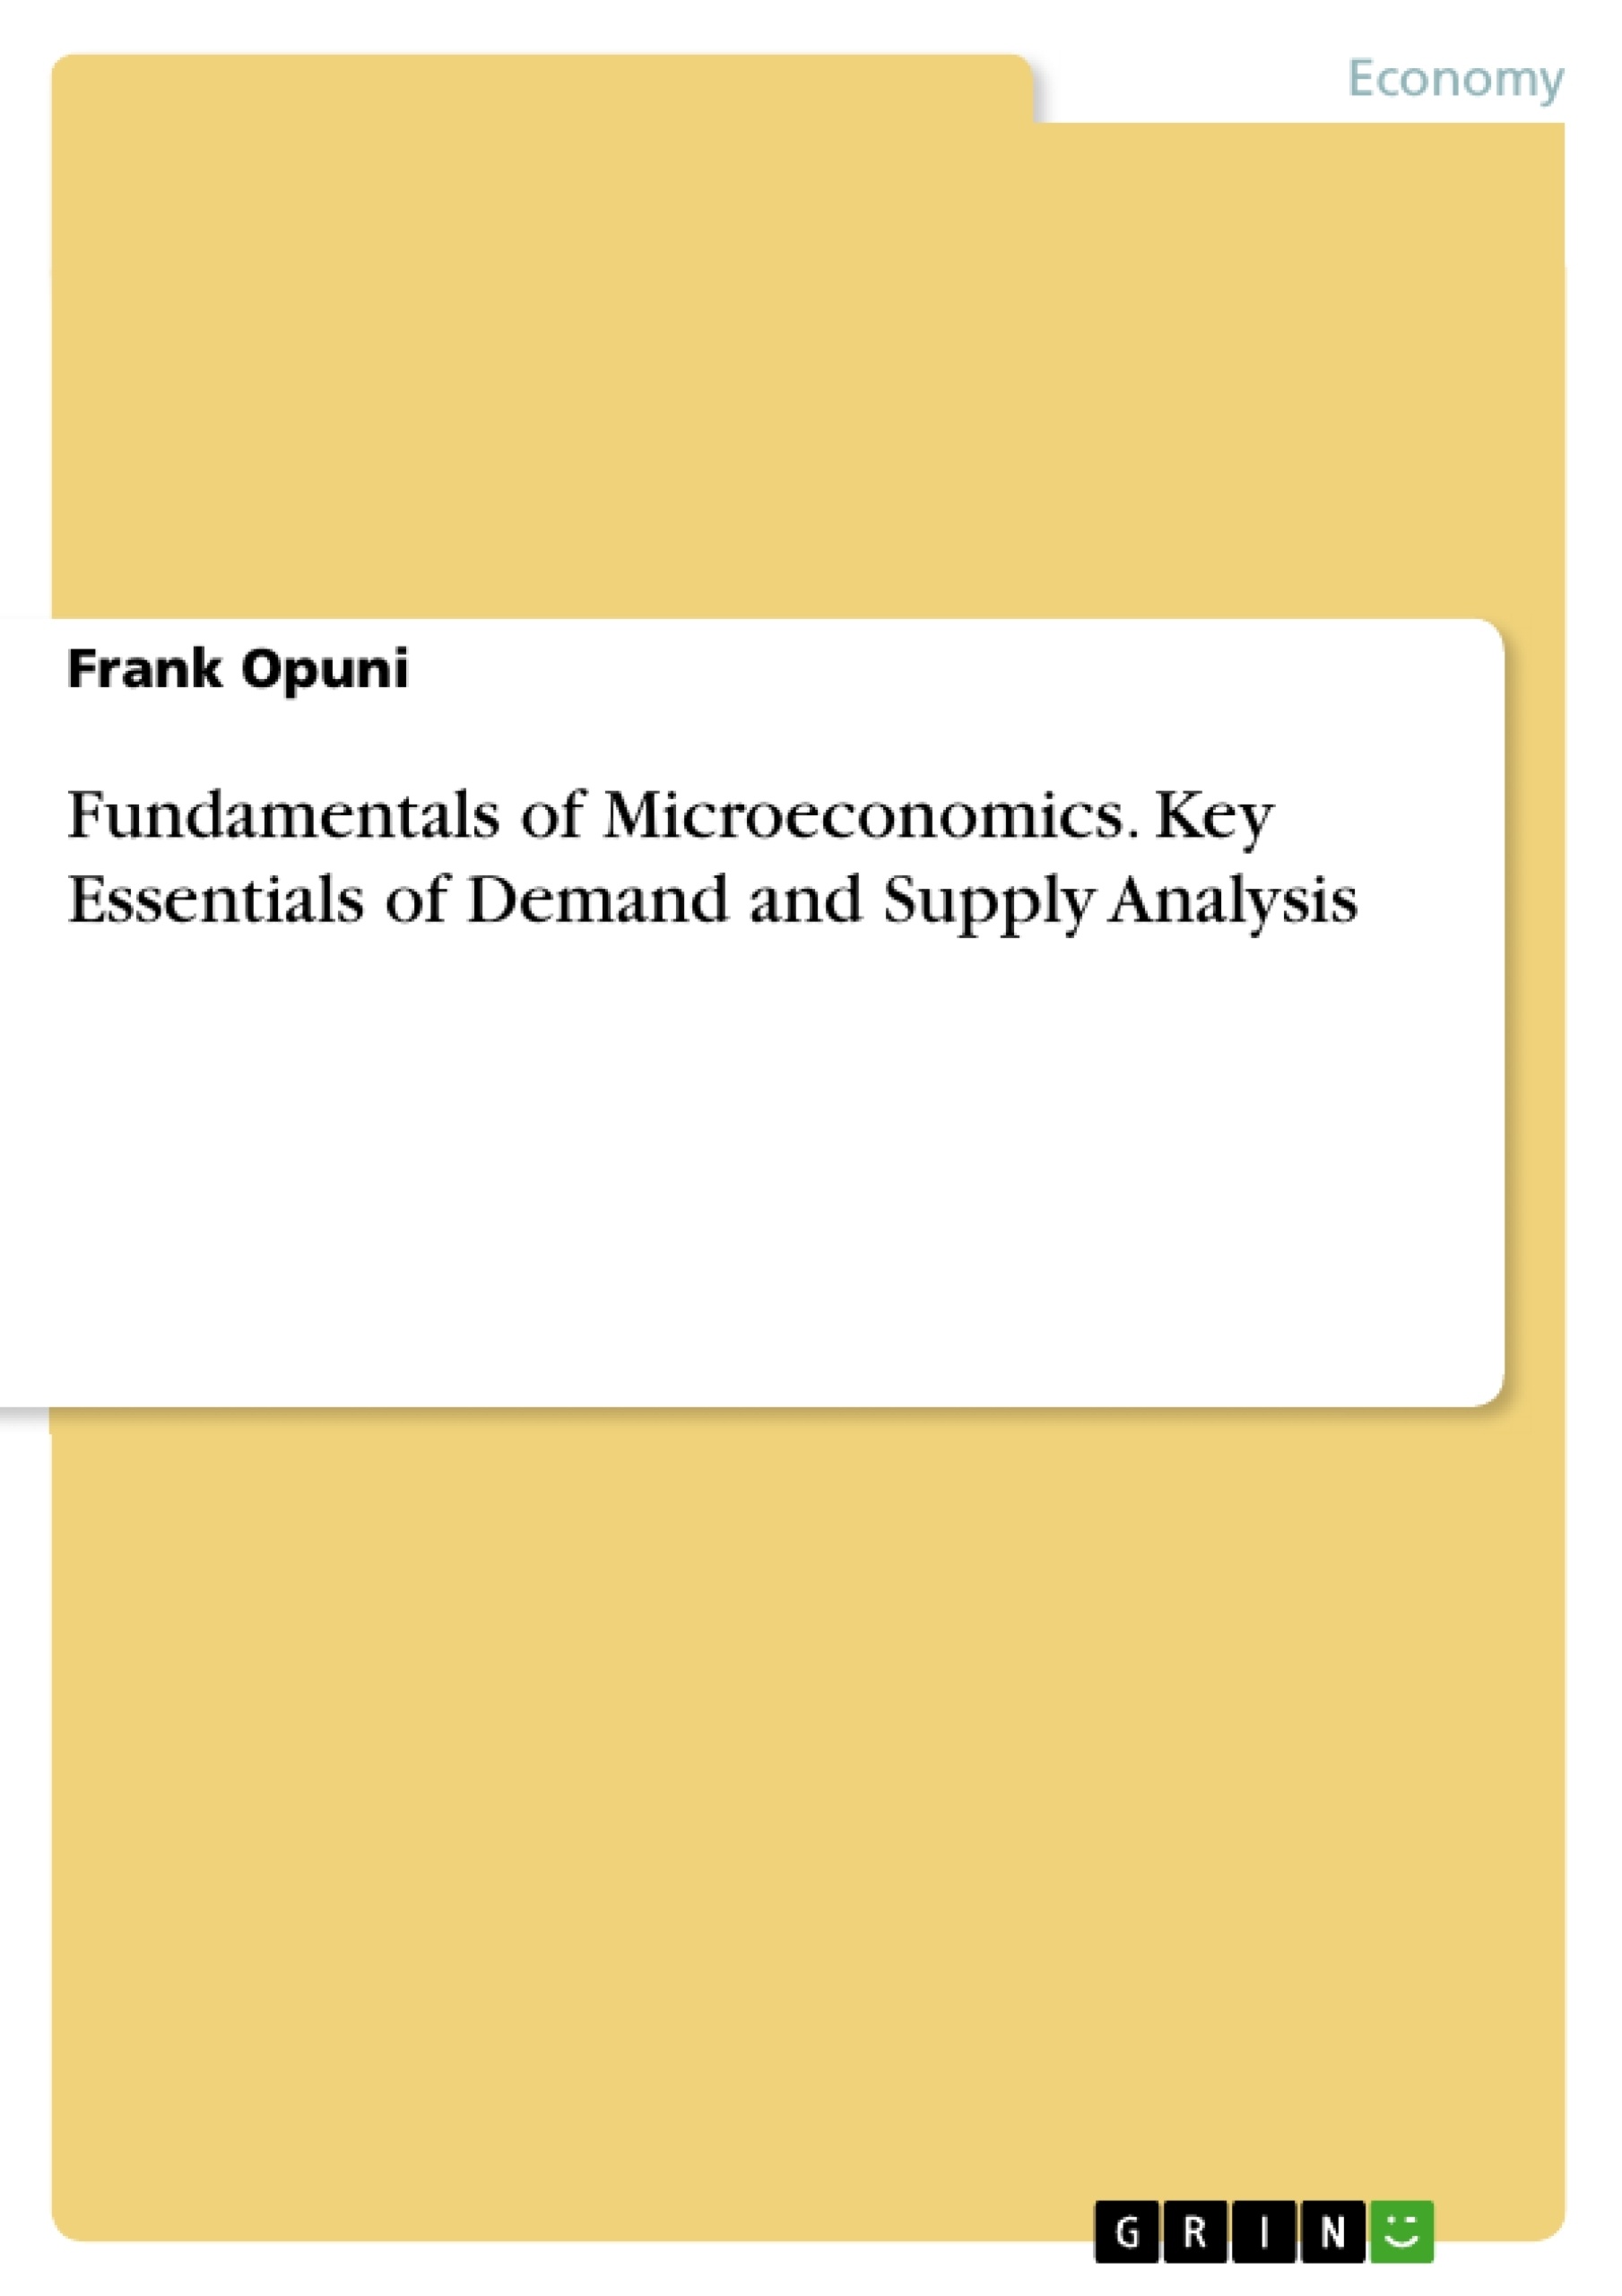 Title: Fundamentals of Microeconomics. Key Essentials of Demand and Supply Analysis